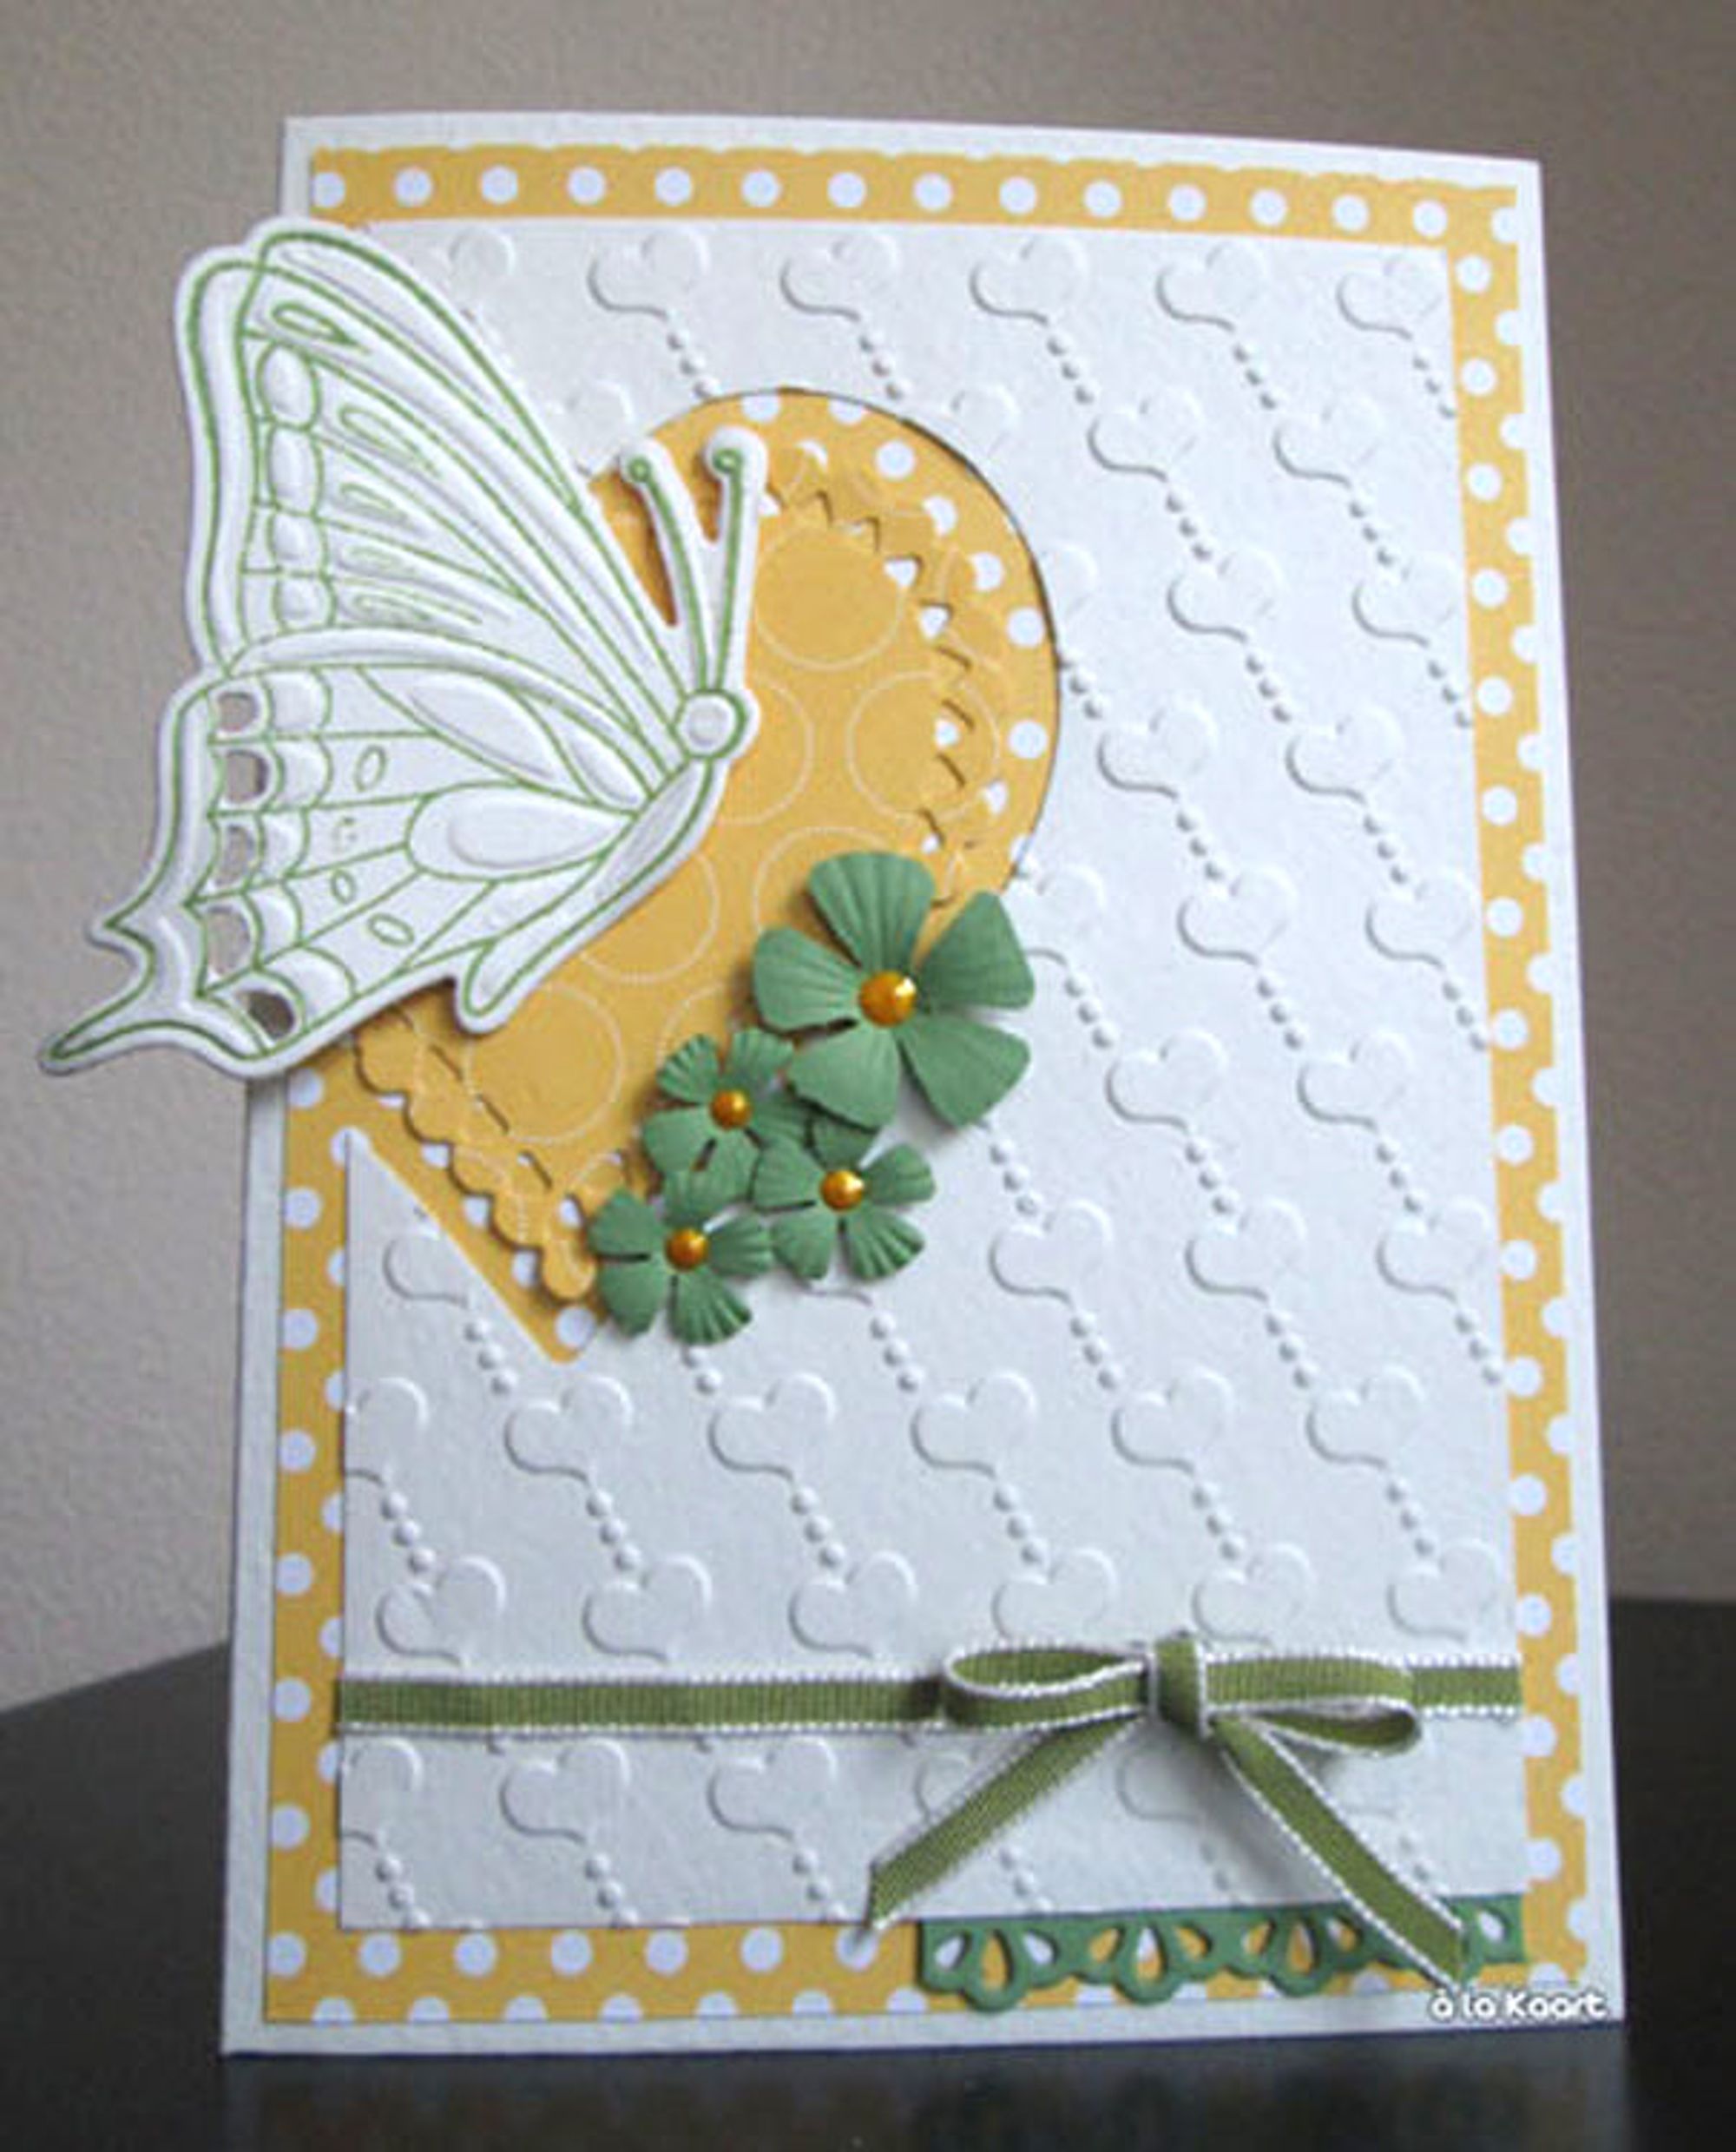 Marianne Design: Collectables Die & Stamp Set - Tiny's Butterflies